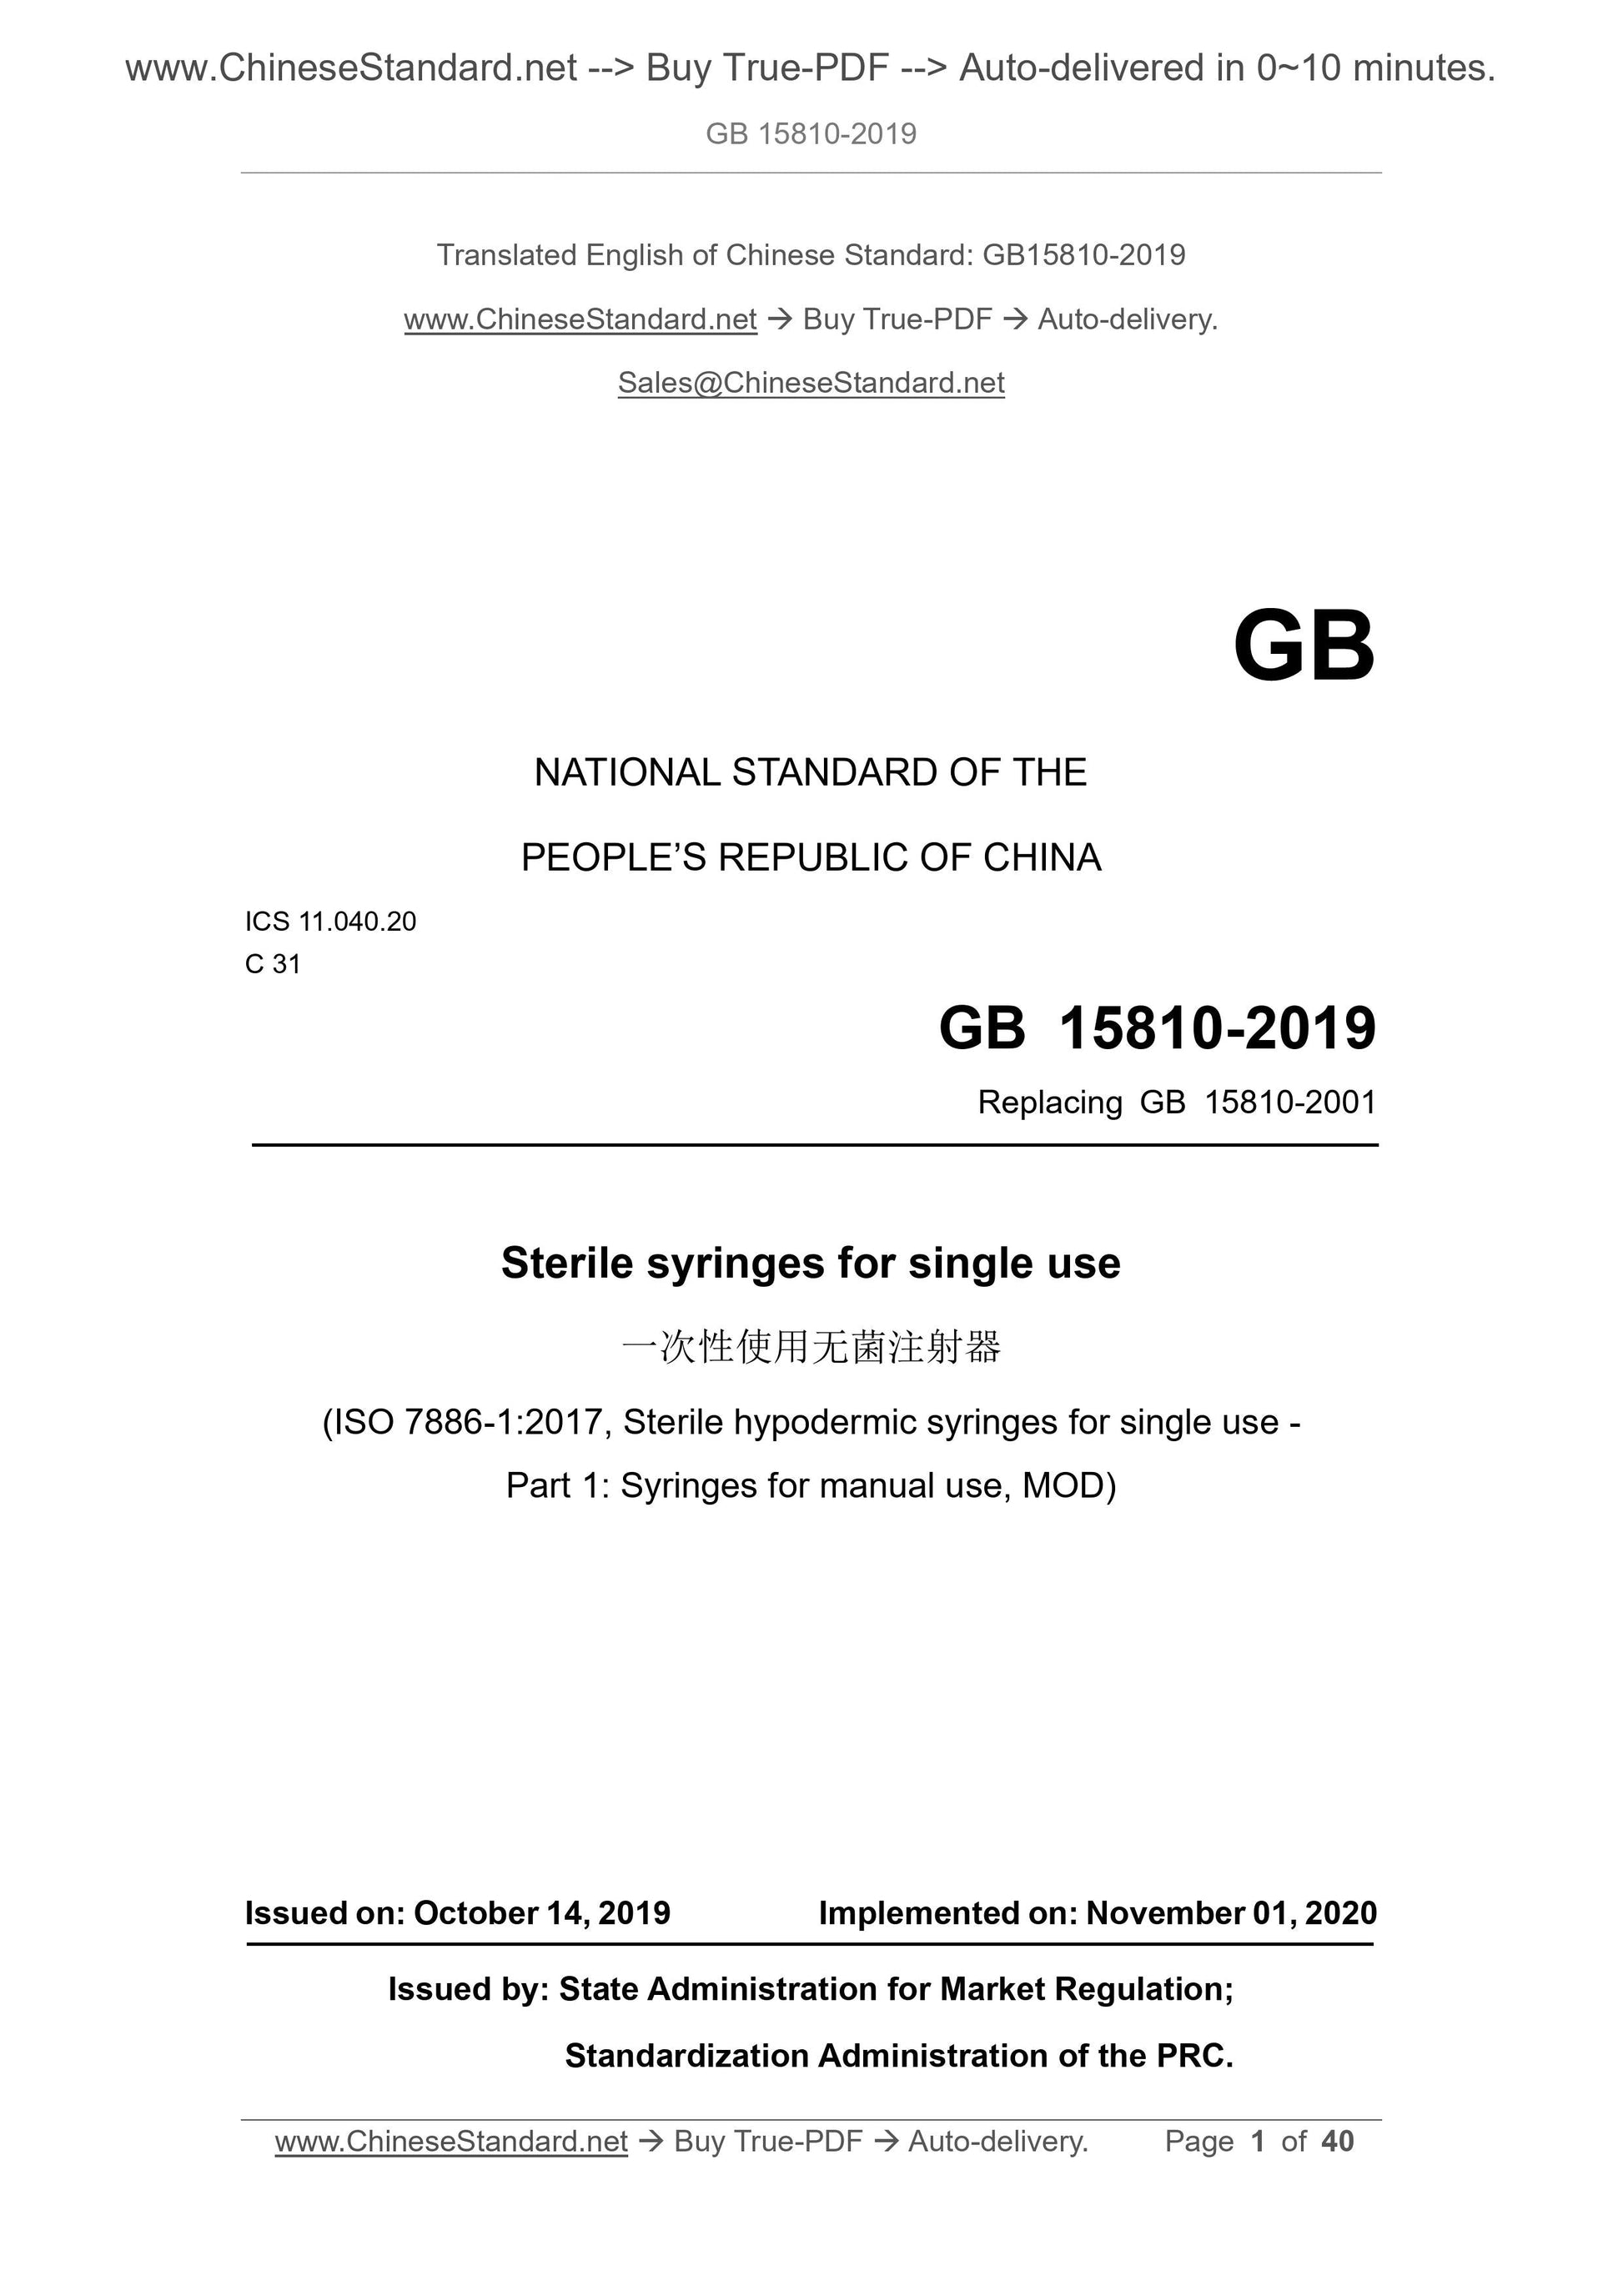 GB 15810-2019 Page 1